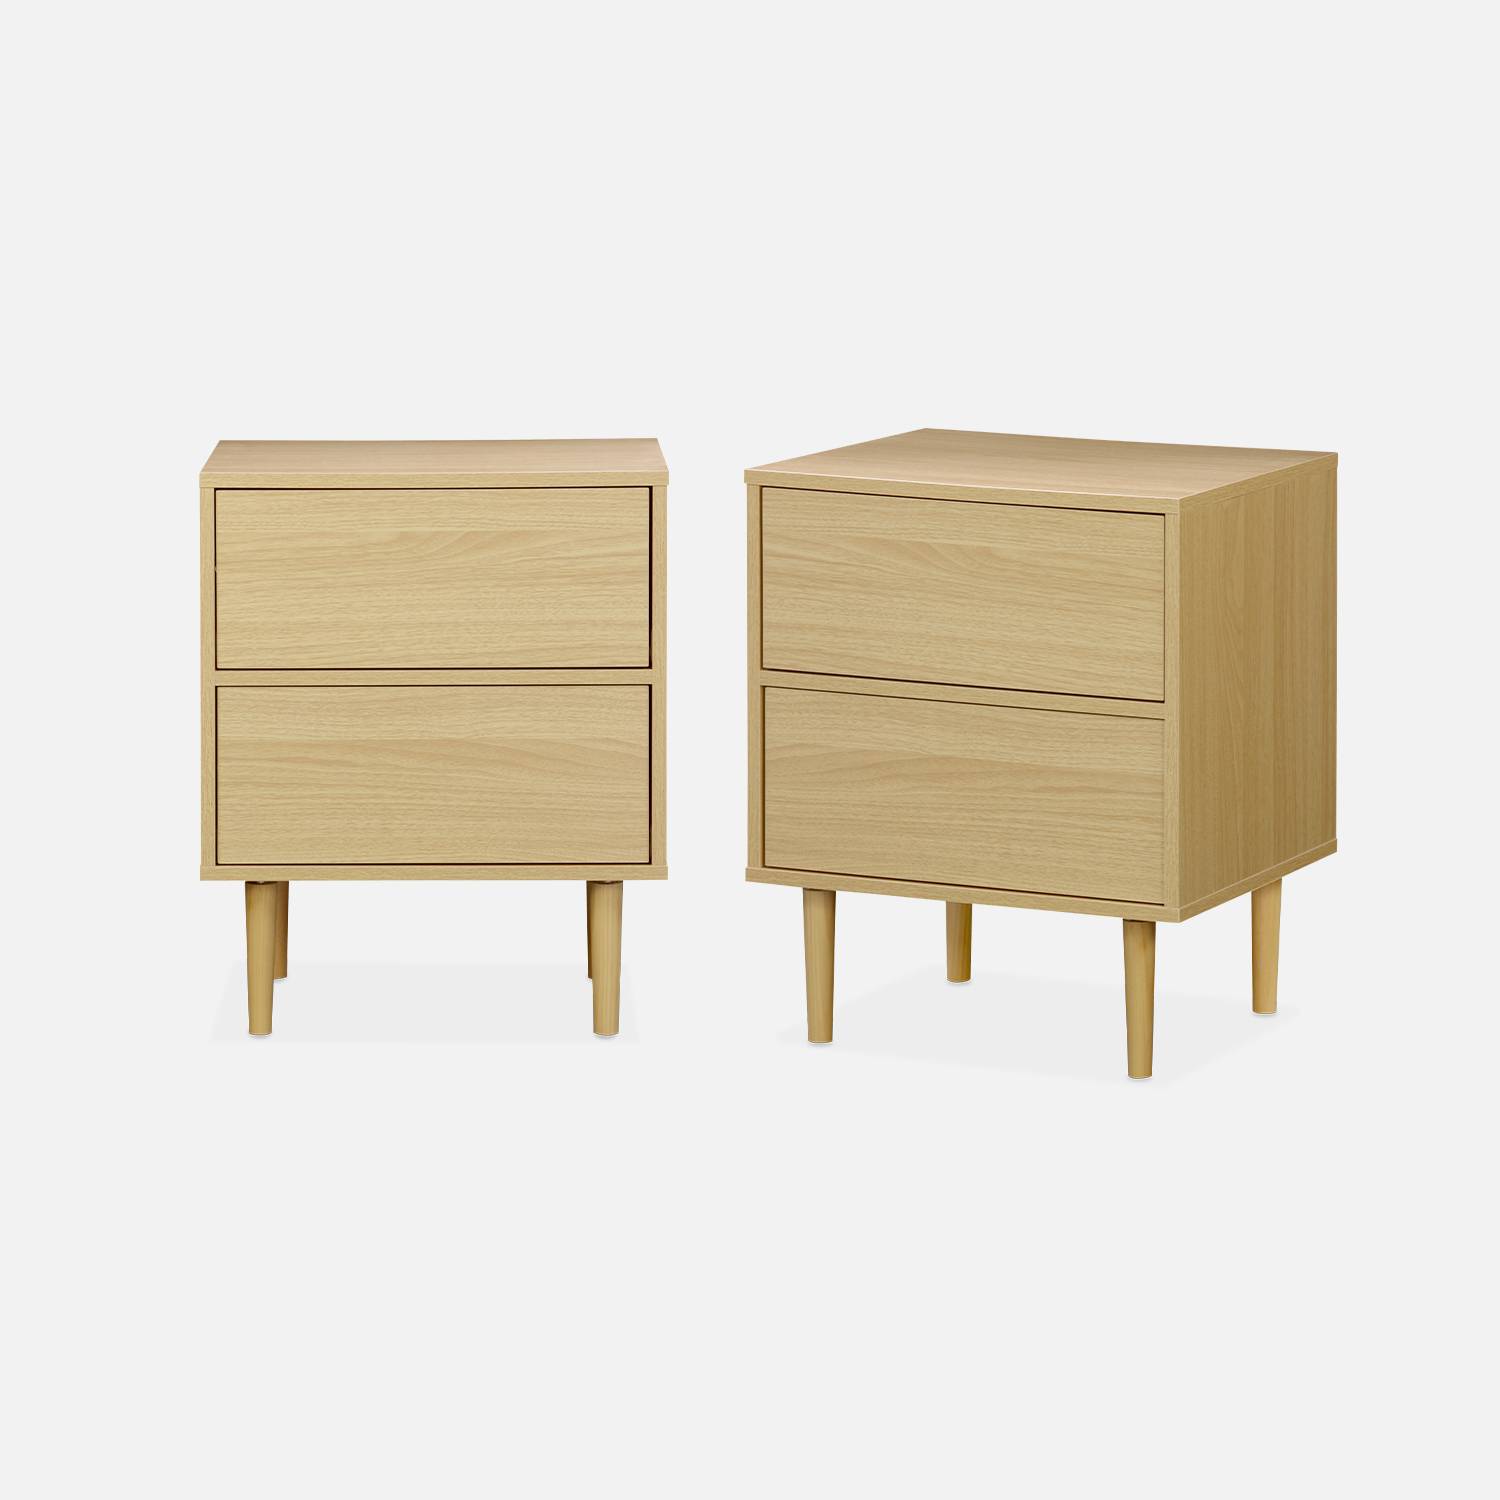 Pair of wood-effect bedside tables with two drawers, 48x40x59cm, Natural Wood colour | sweeek